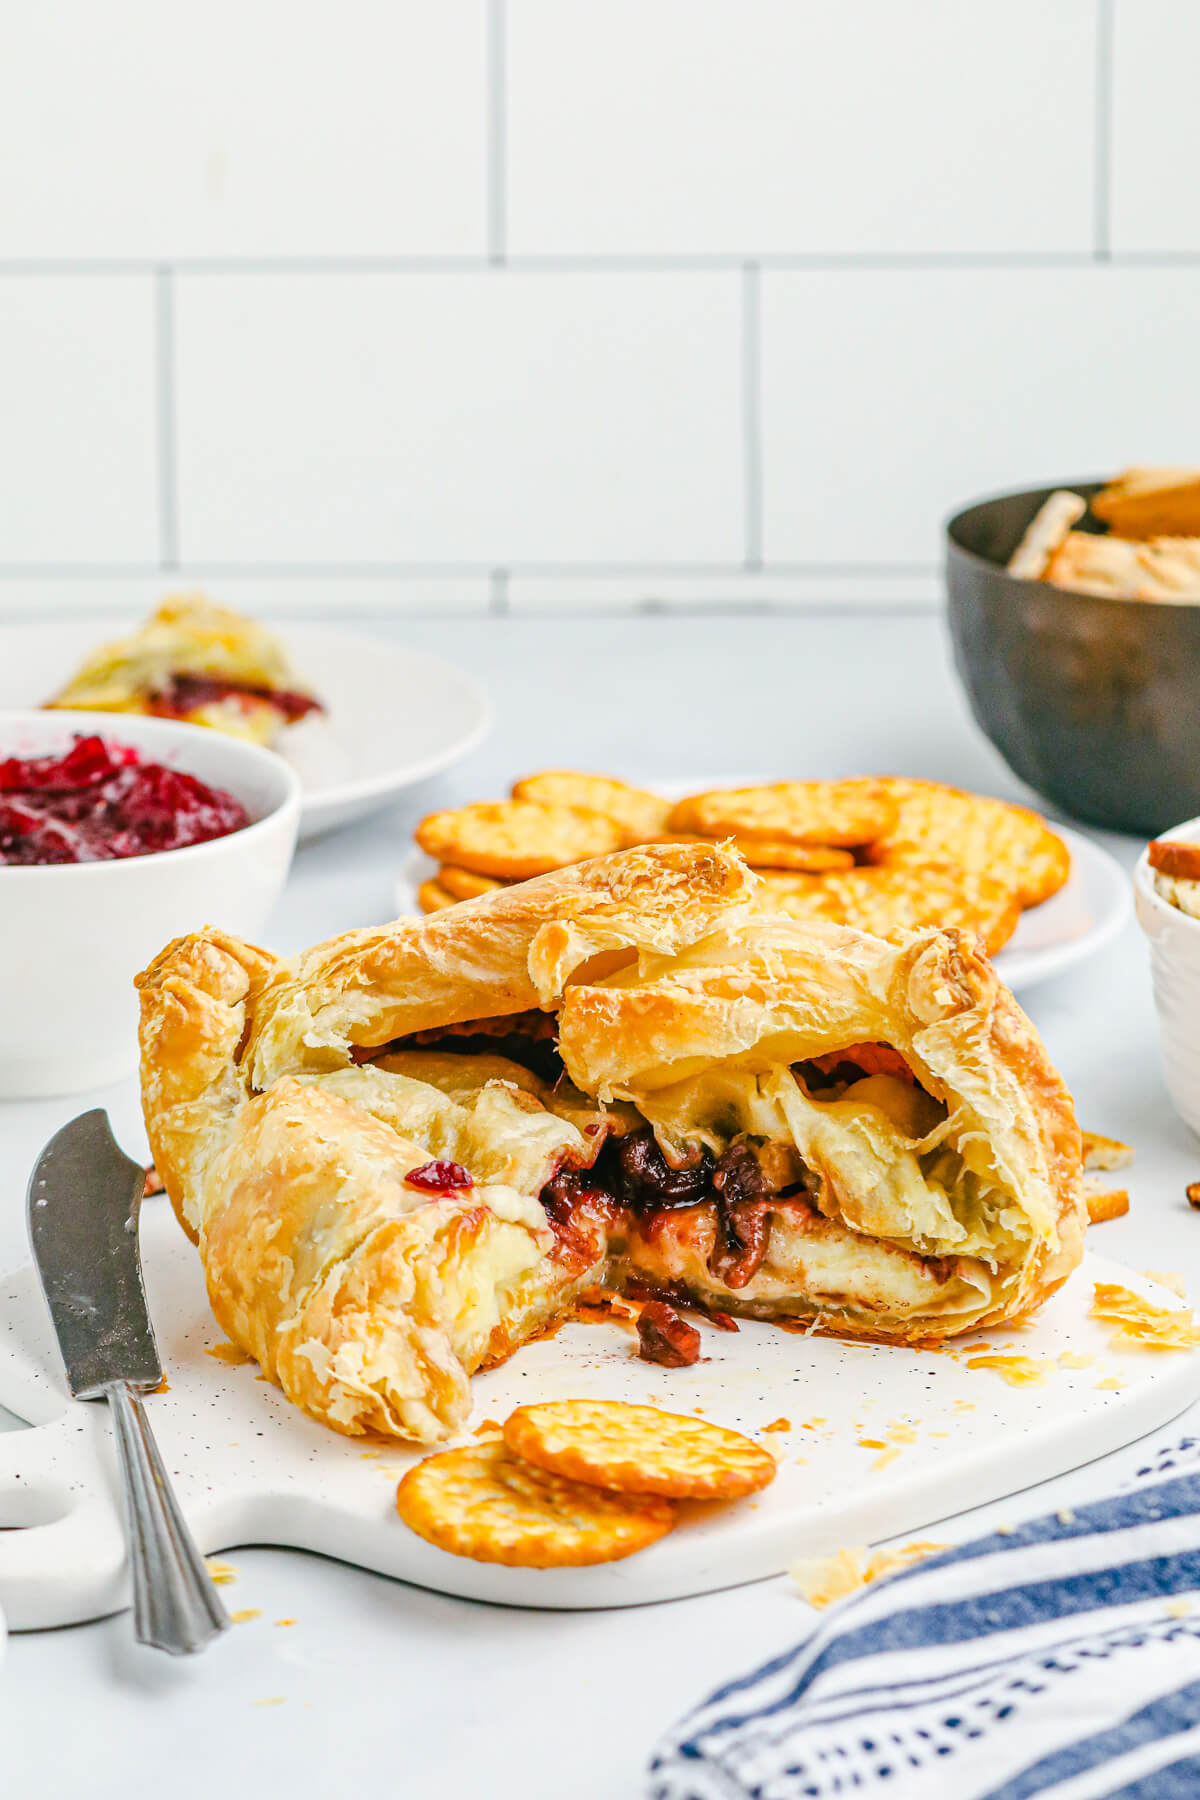 A golden Baked Brie en croute cut open to show the melted cheese, cranberries, and pecans inside.